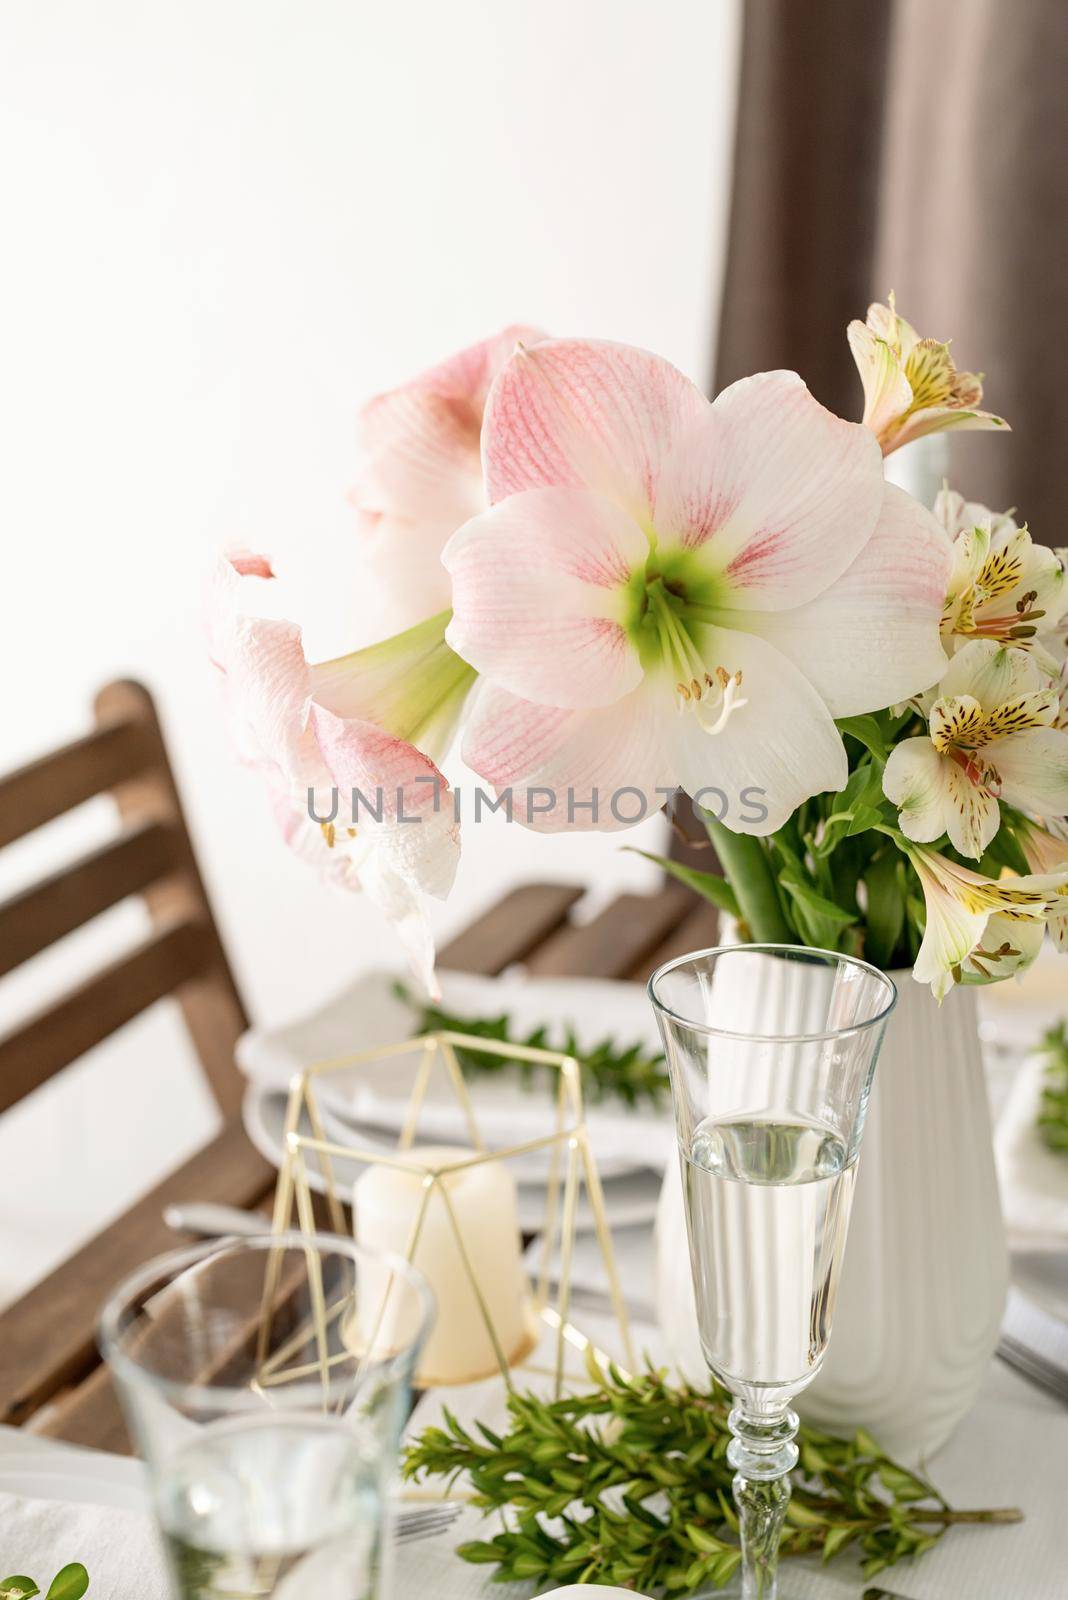 The wedding table setting and decor on wooden table in rustic style. Wedding table scapes. Table set up with boxwood and amaryllis flowers